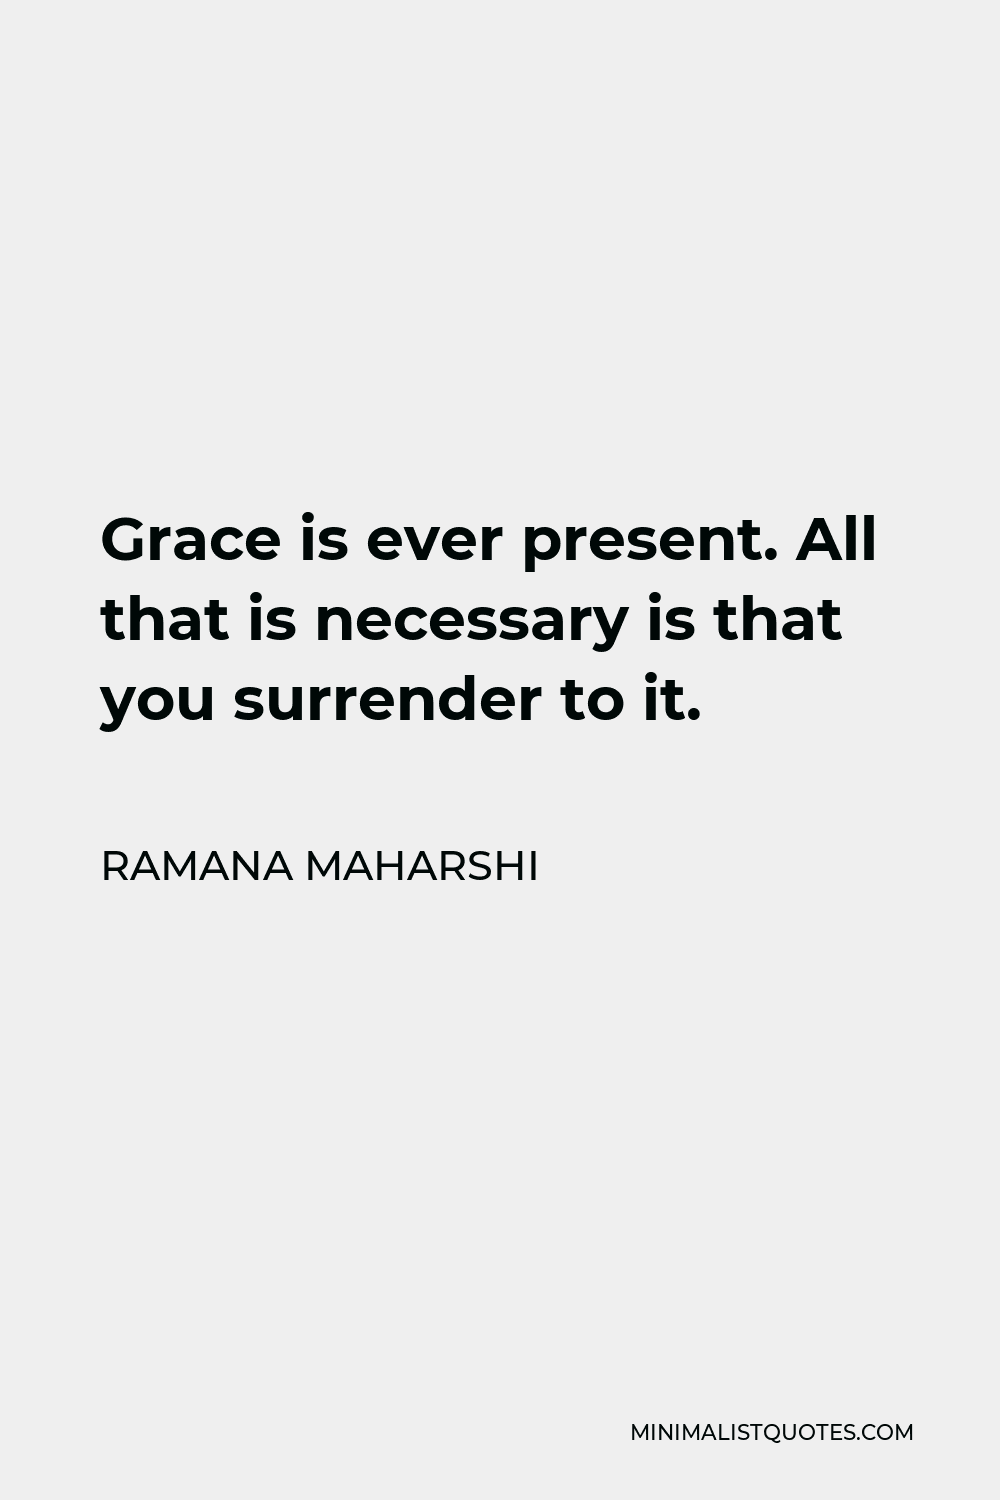 Ramana Maharshi Quote - Grace is ever present. All that is necessary is that you surrender to it.